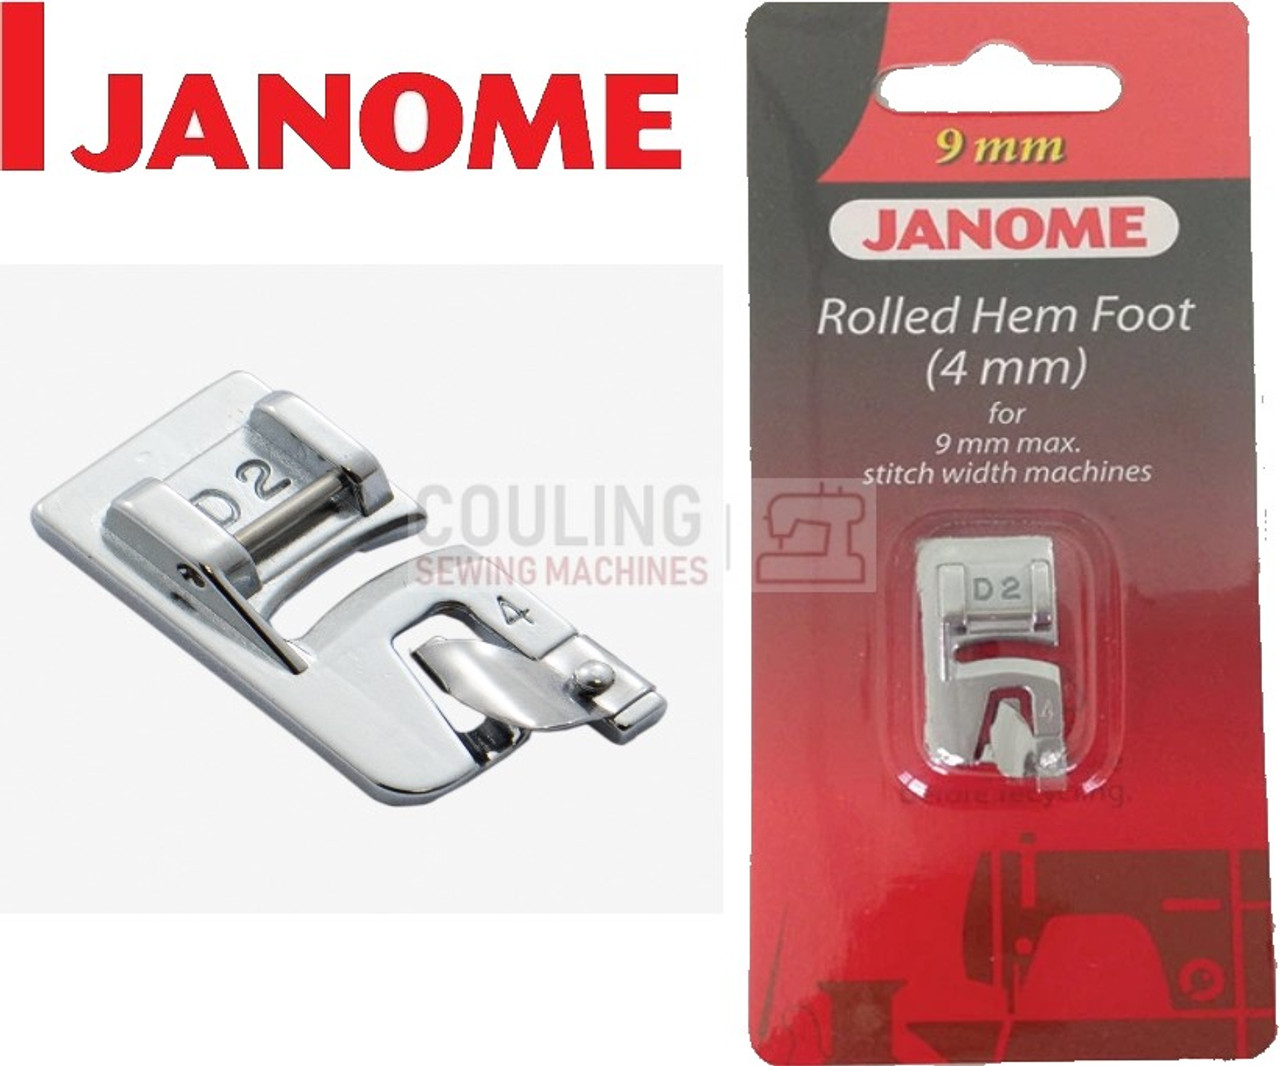 JANOME ROLLED HEM HEMMER FOOT 4mm D2 - 202081007 9mm CATEGORY D - Couling  Sewing Machines